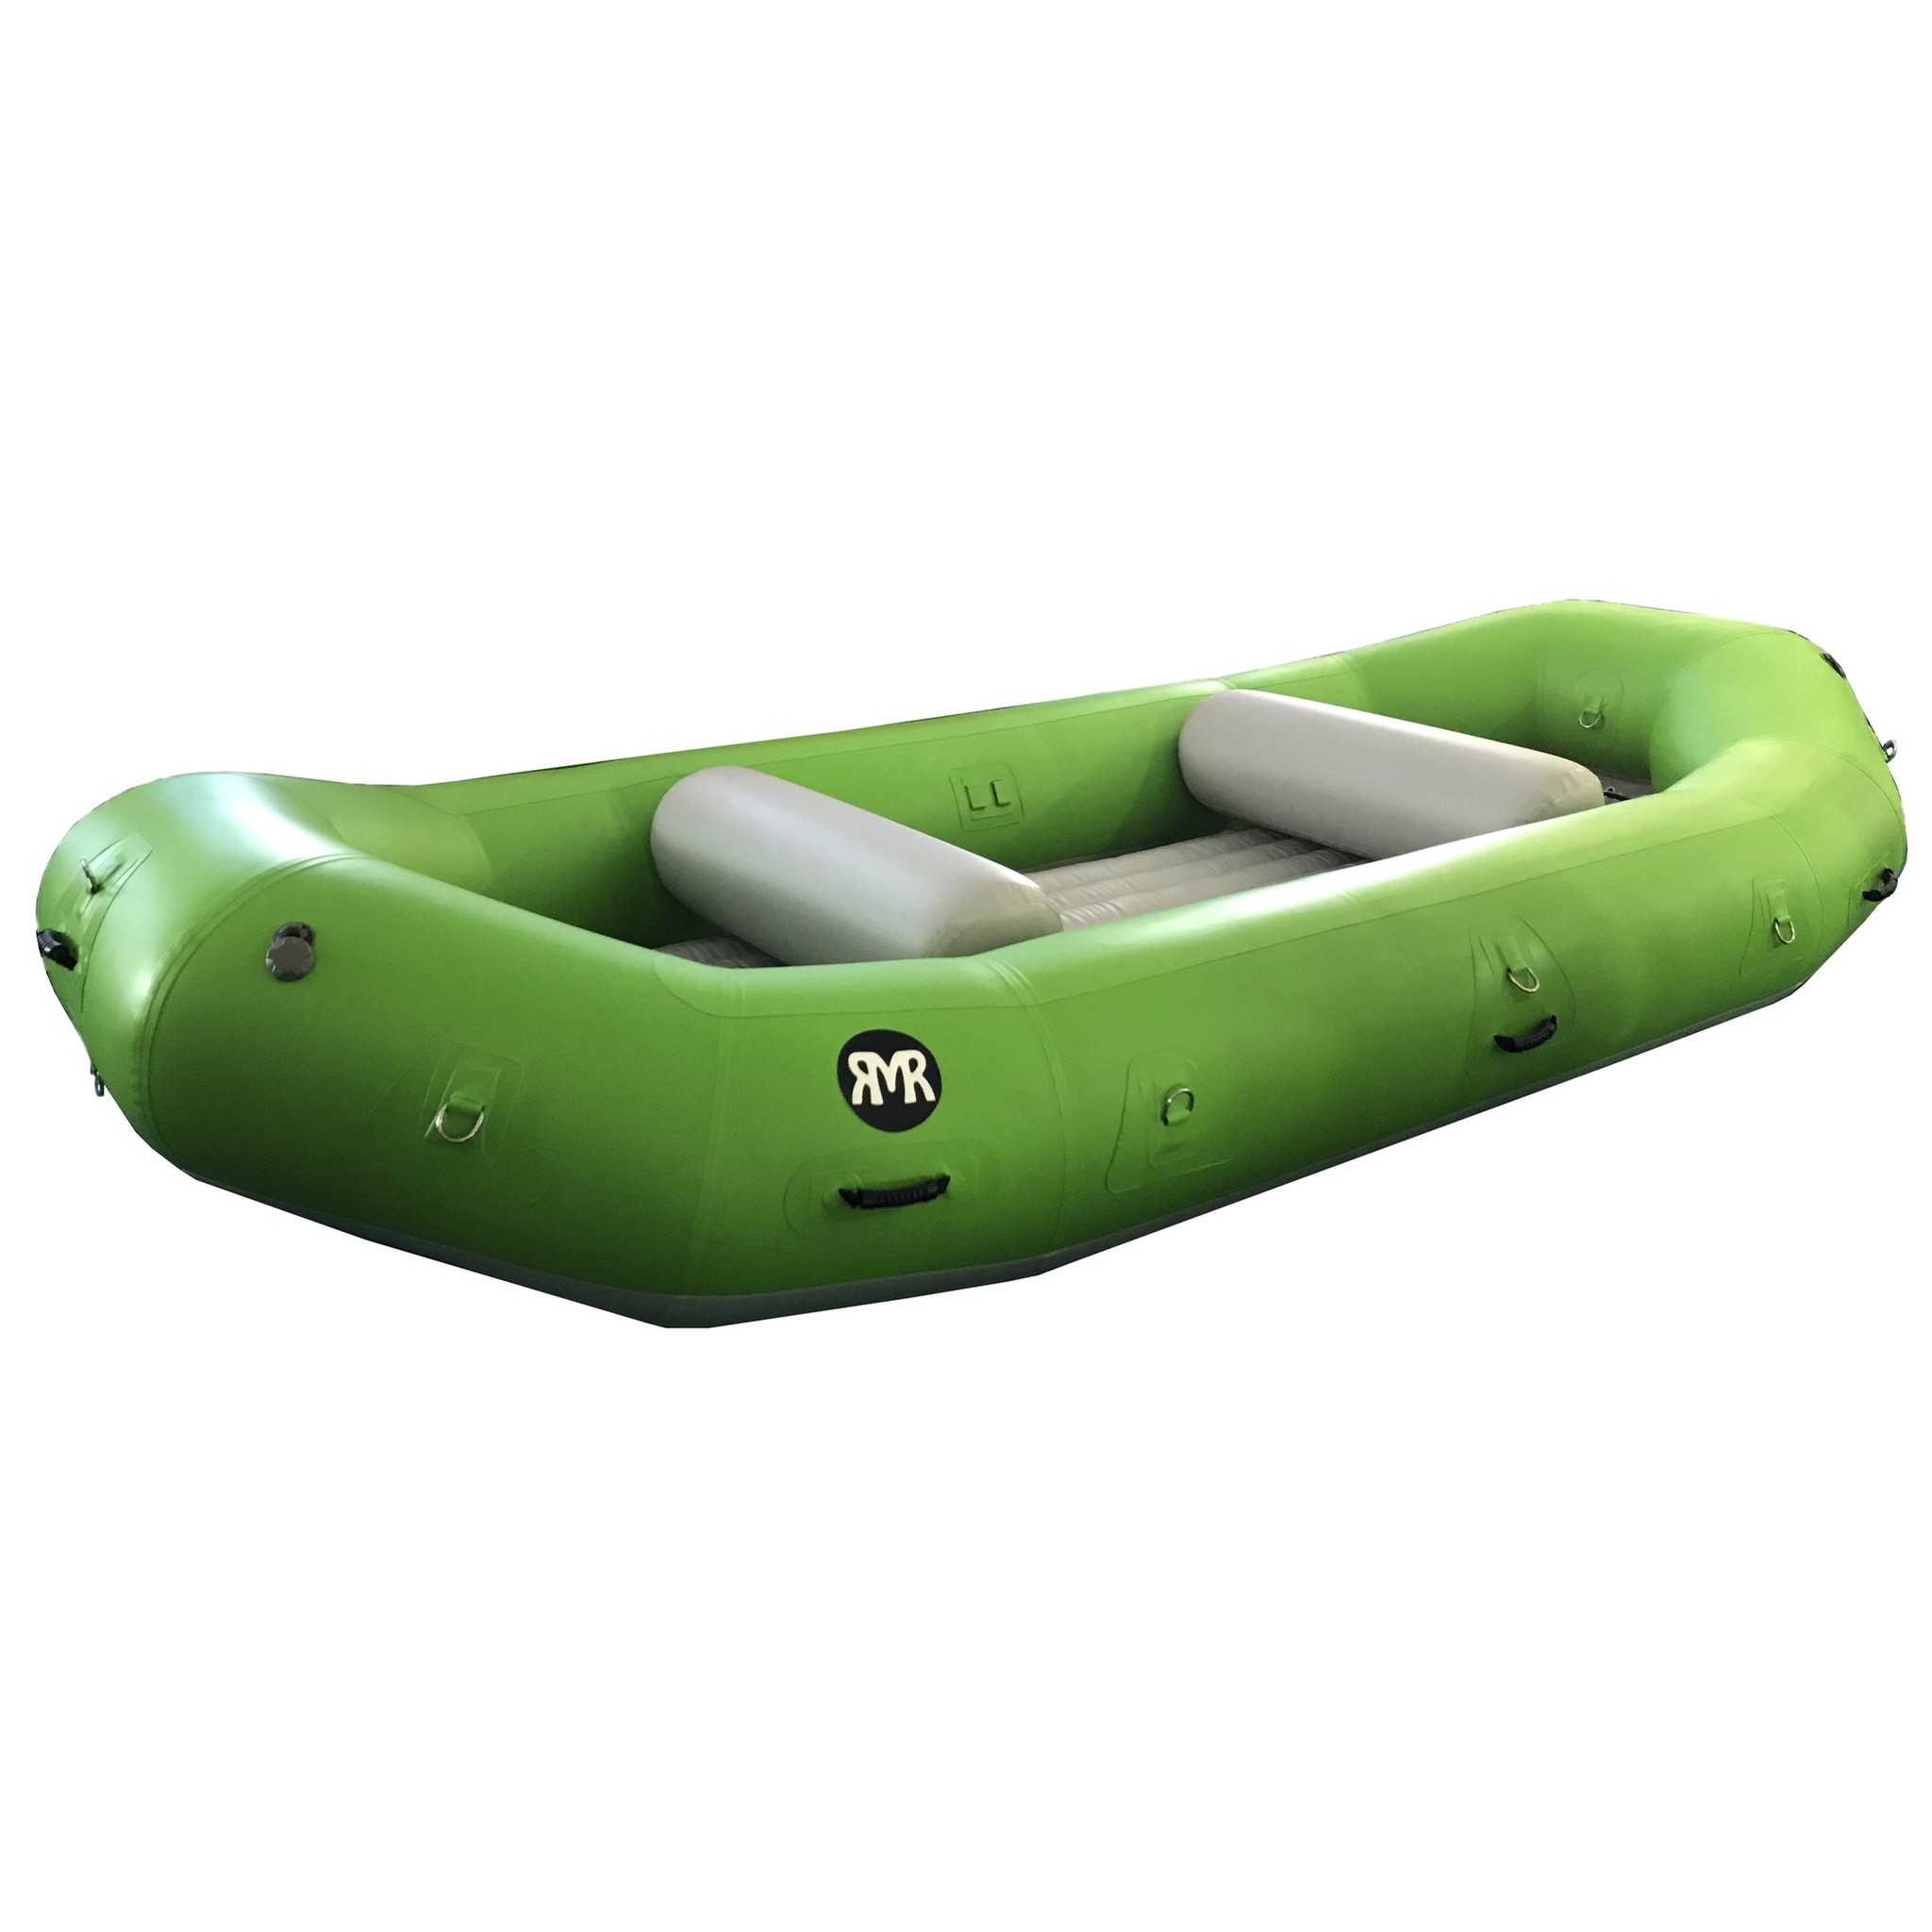 https://www.companybe.com/DownRiverEquipment/product_photos/rd_images/rd_Rocky_Mountain_Rafts_SB_160_LIME.jpg